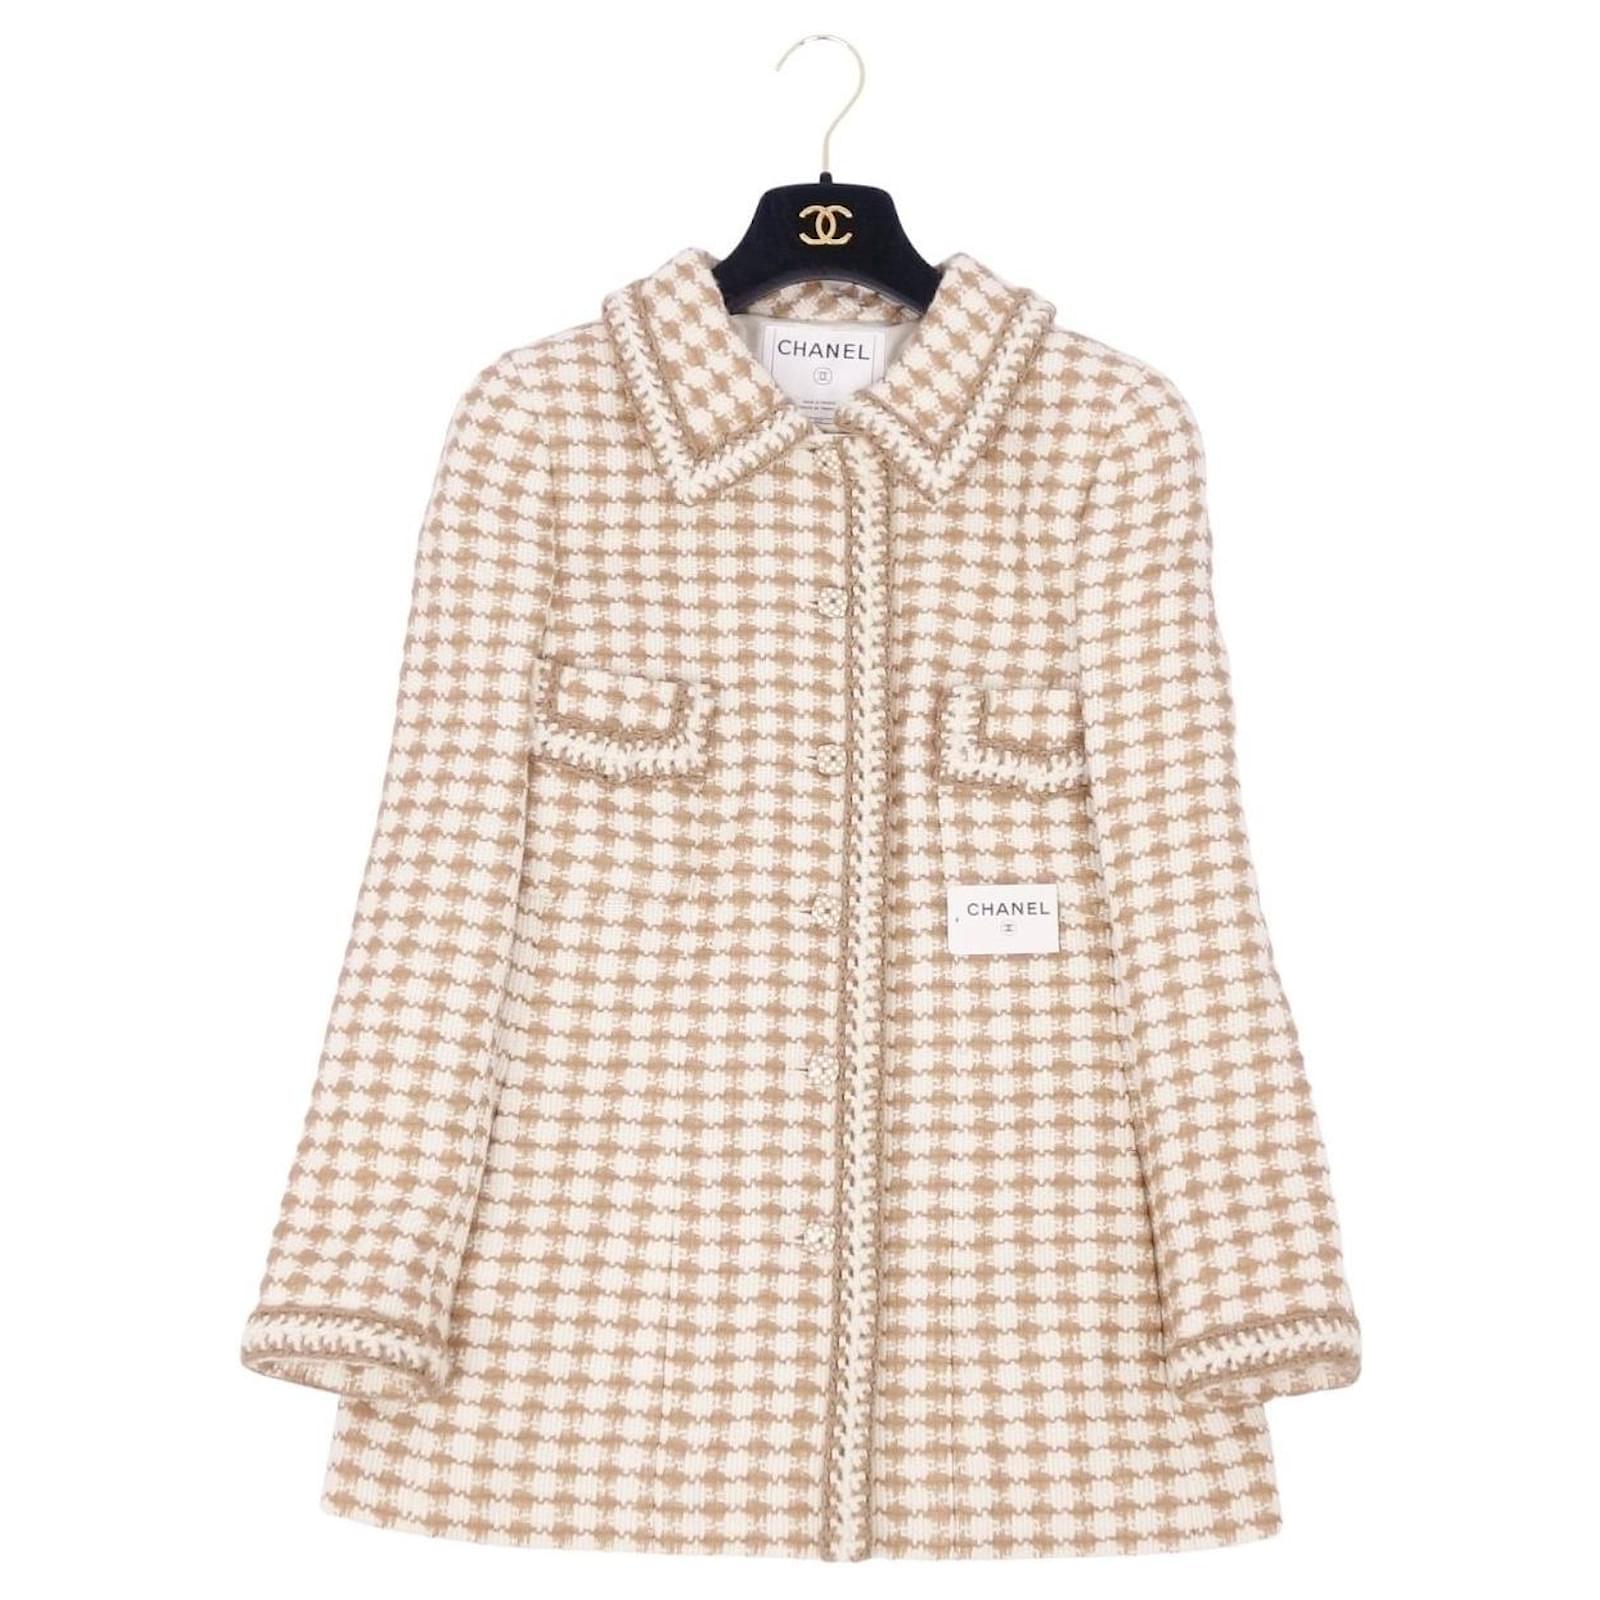 *[Used] Vintage Chanel Jacket Coco Mark Tweed Knit Piping Wool Houndstooth  Beige / White Size 36 (S equivalent)